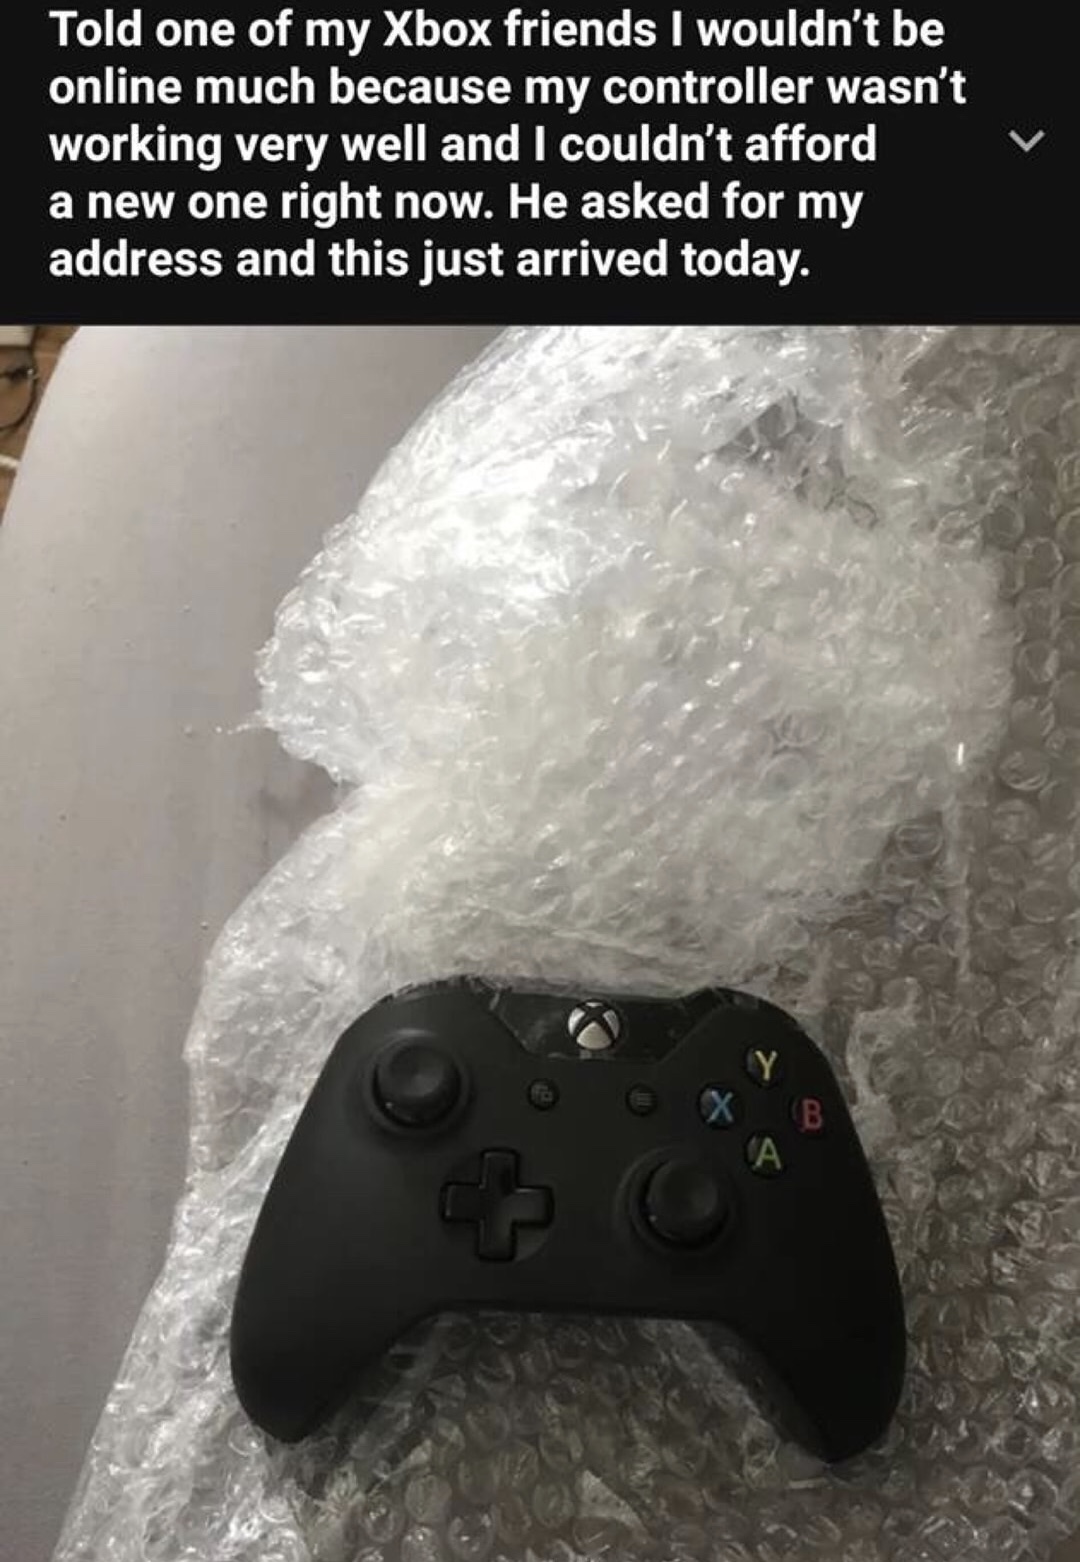 memes - game controller - Told one of my Xbox friends I wouldn't be online much because my controller wasn't working very well and I couldn't afford a new one right now. He asked for my address and this just arrived today.